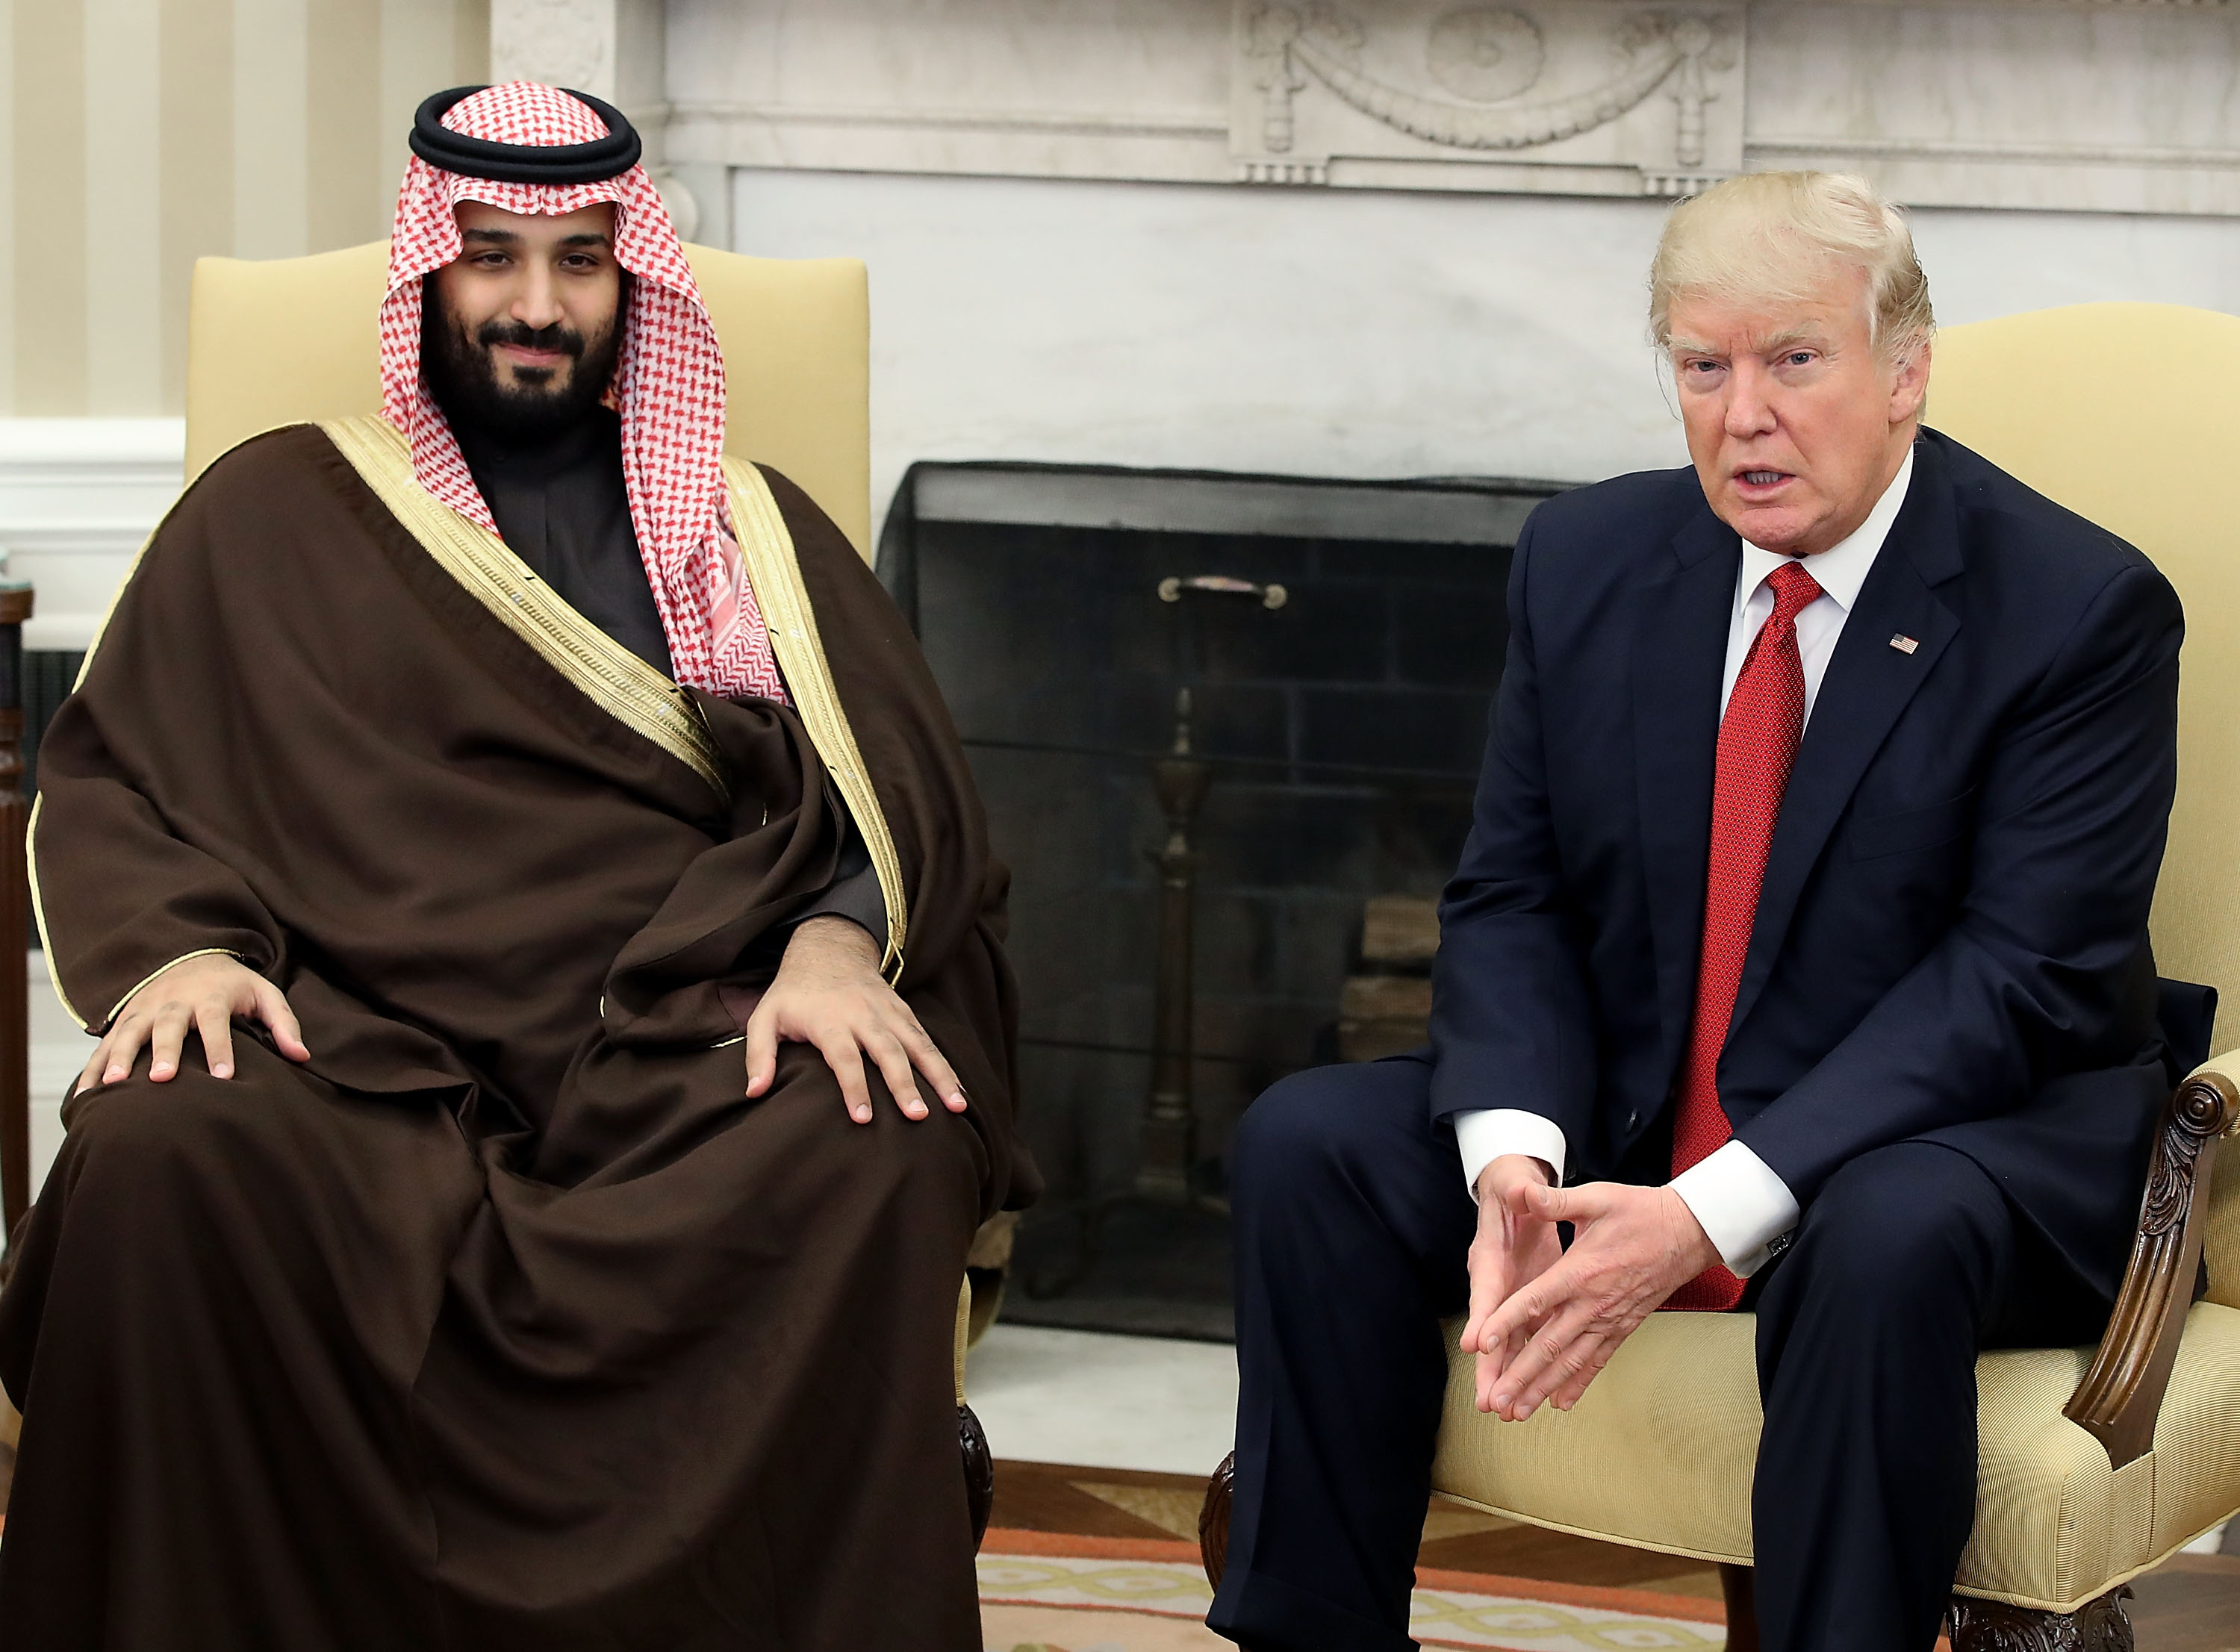 U.S. President Donald Trump (R) meets with Mohammed bin Salman, Deputy Crown Prince and Minister of Defense of the Kingdom of Saudi Arabia, in the Oval Office at the White House, March 14, 2017 in Washington, DC. (Mark Wilson—Getty Images)